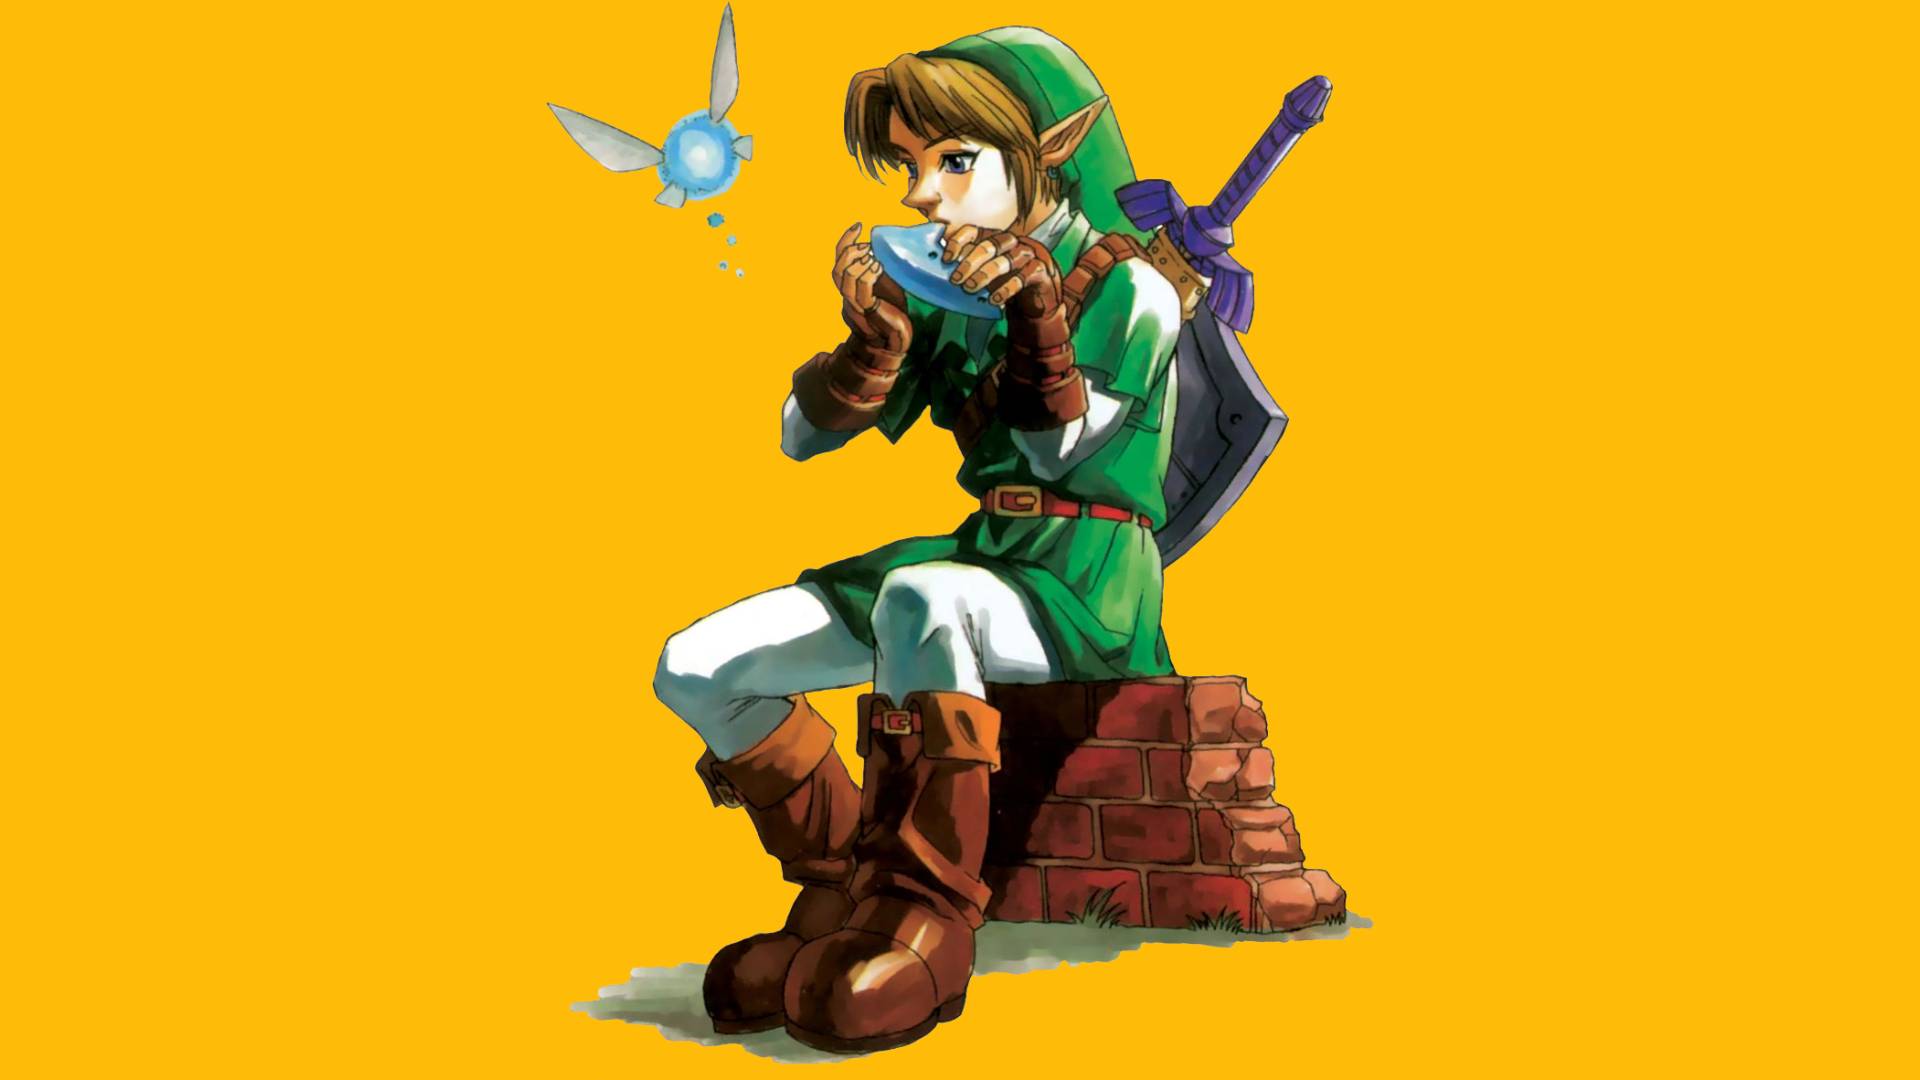 Saria's Song (From: Legend of Zelda: Ocarina of Time) - Single